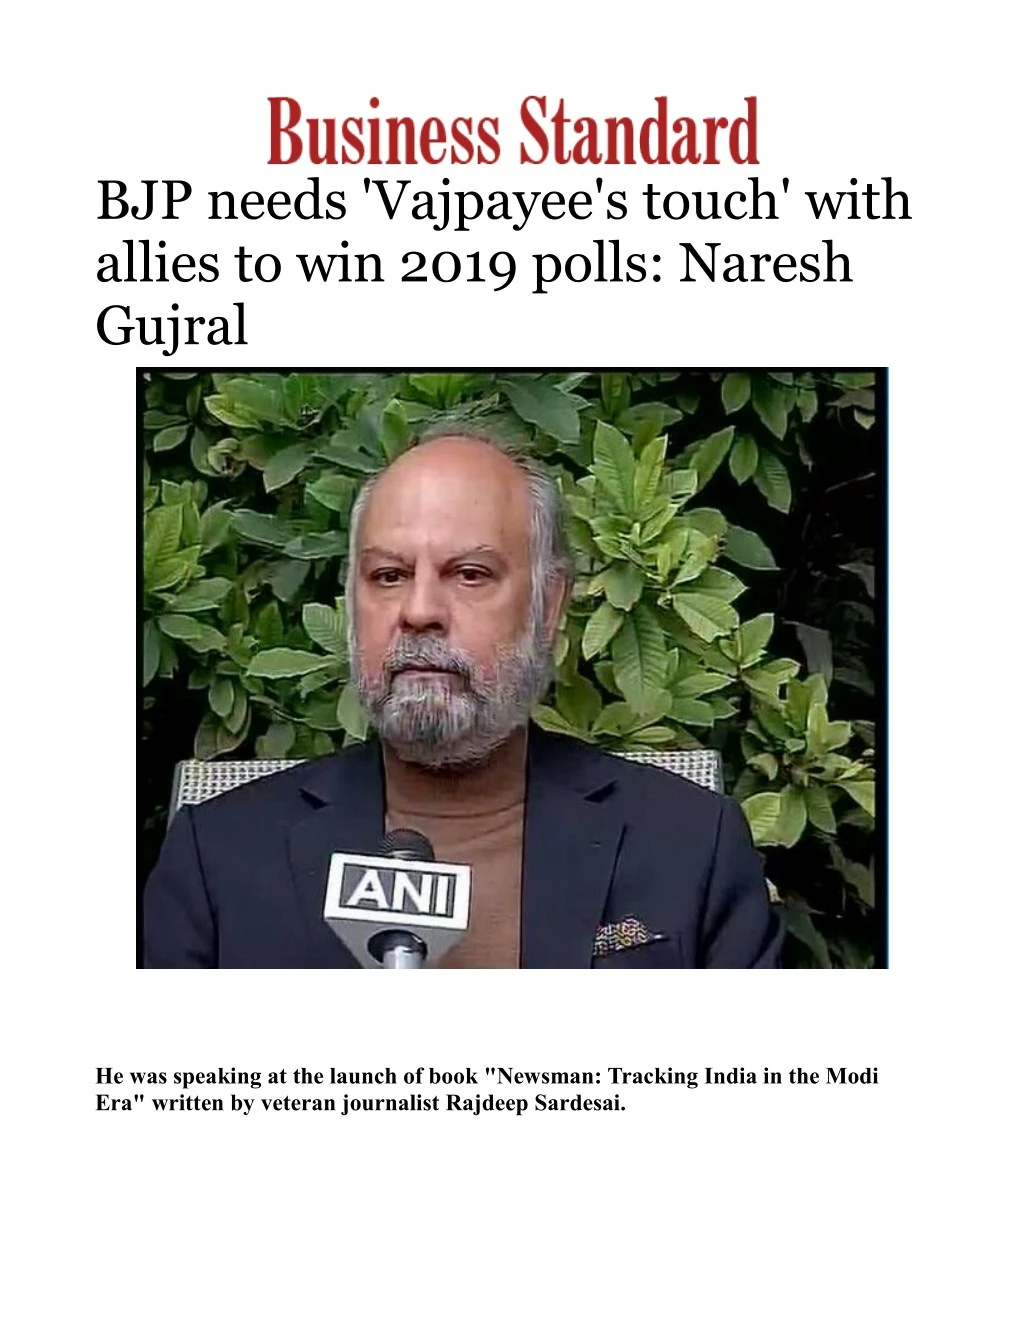 bjp needs vajpayee s touch with allies